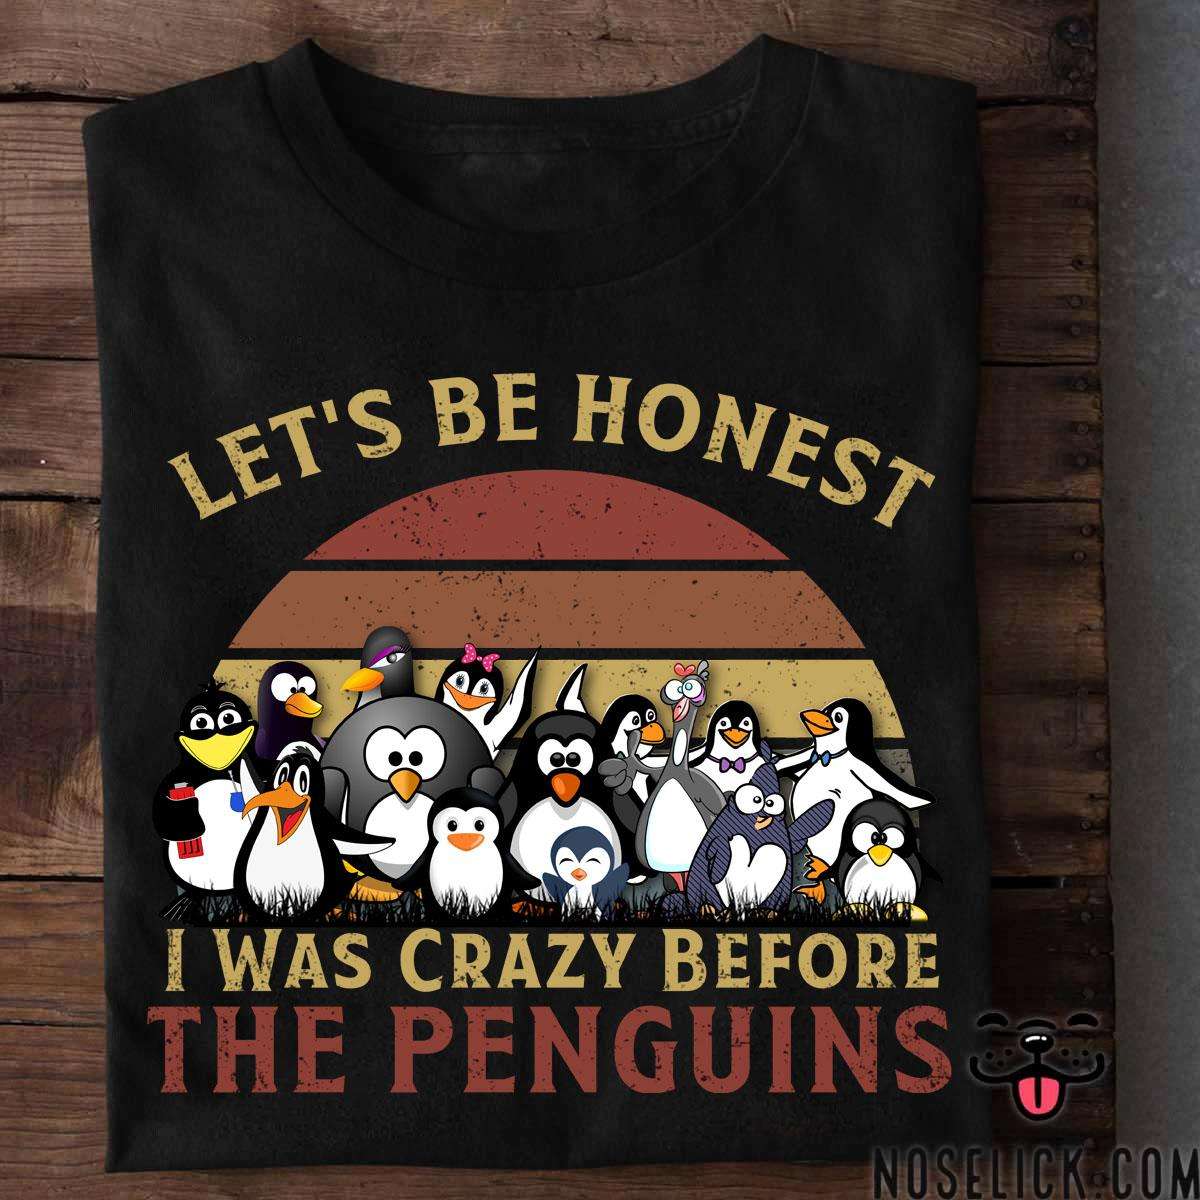 The Penguins Tees Gifts - Let's be honest i was crazy before the penguins